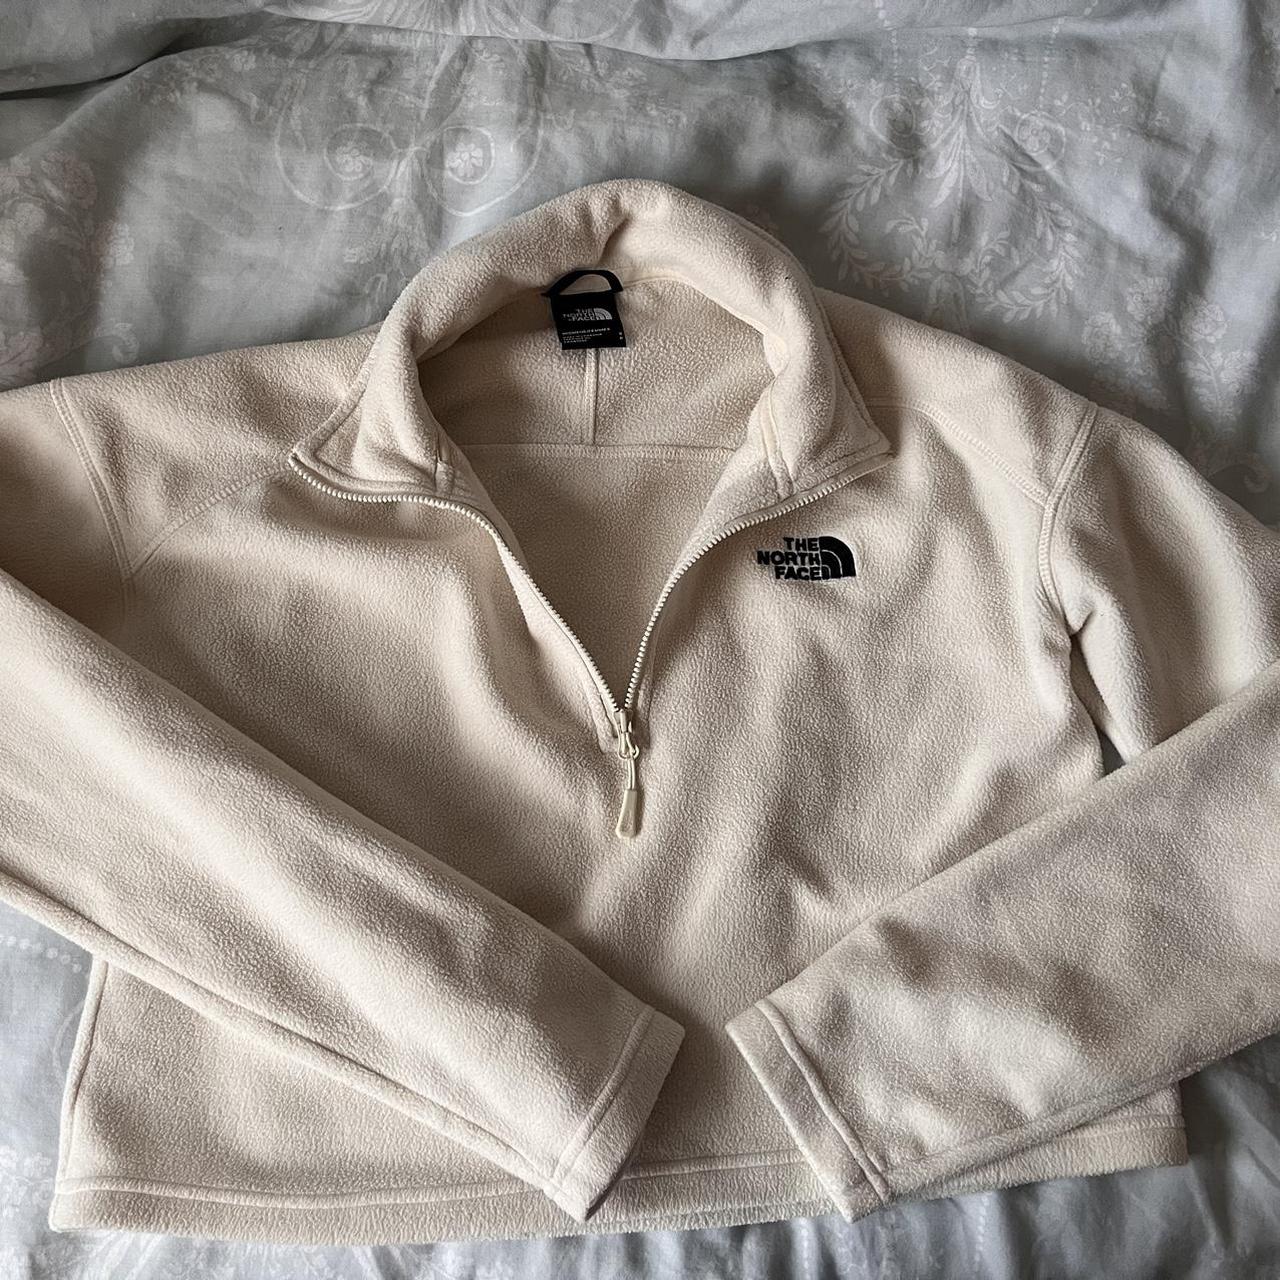 New Fleece from North Face #NorthFace#Casual#Winter - Depop